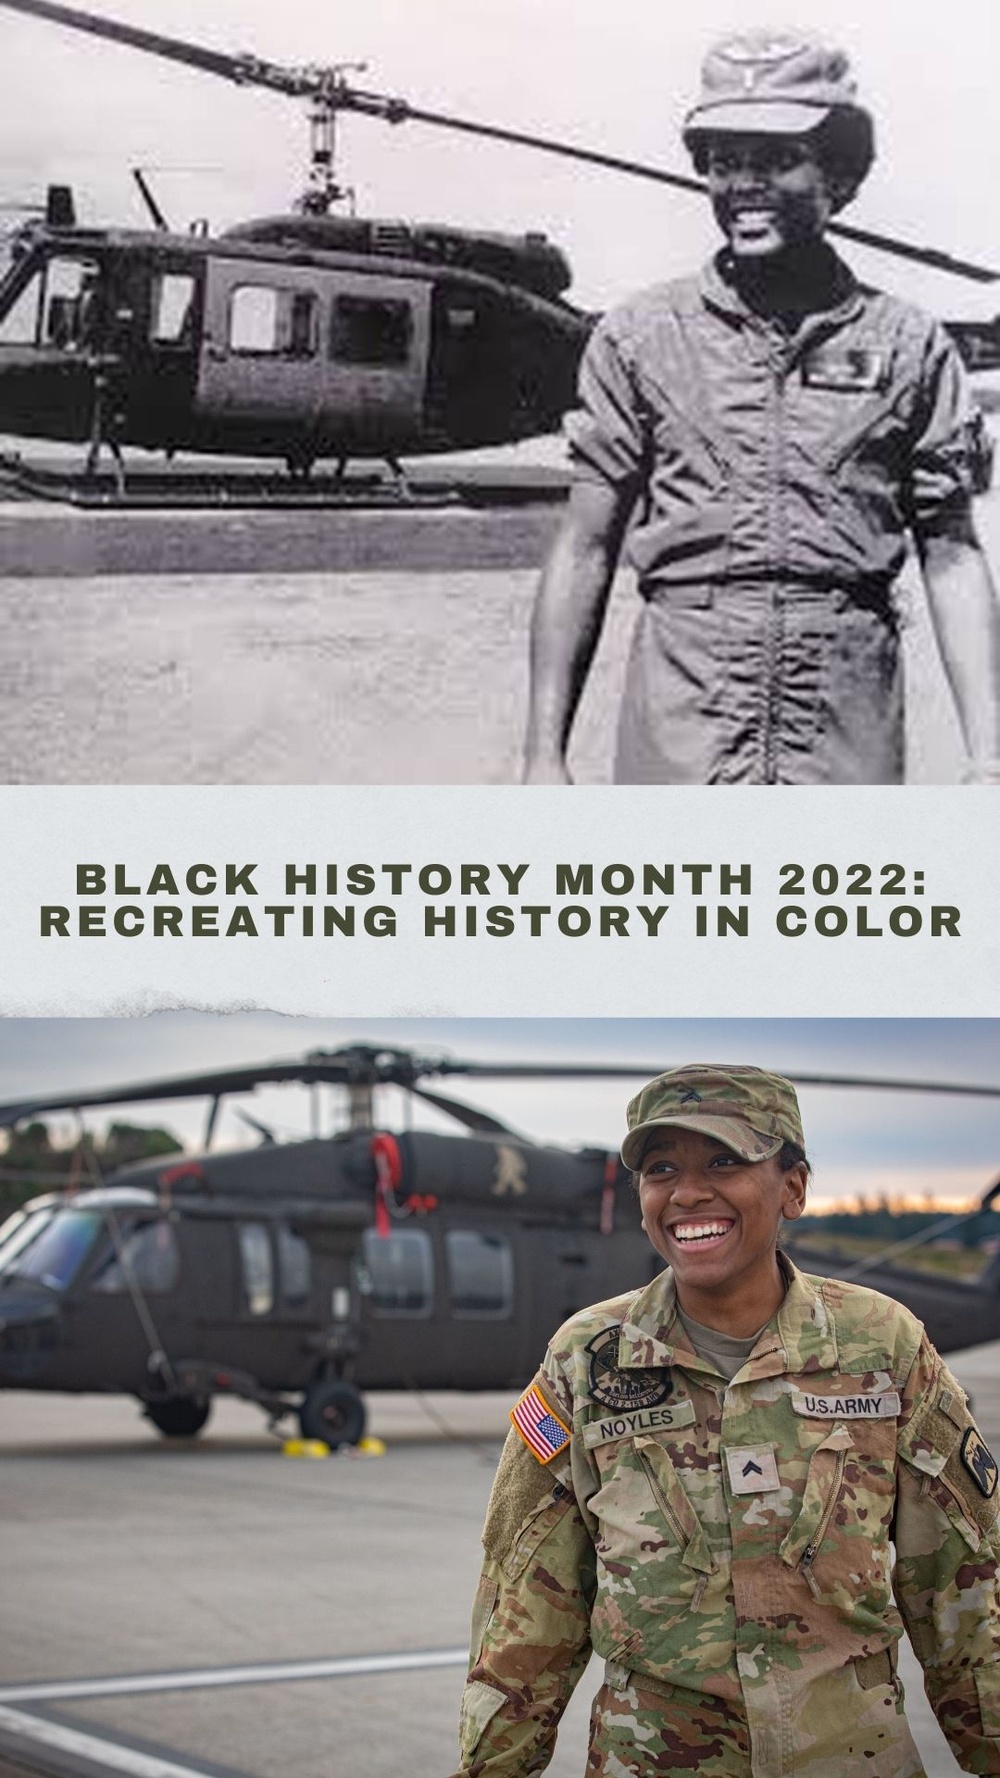 Black History Month 2022: Recreating History in Color